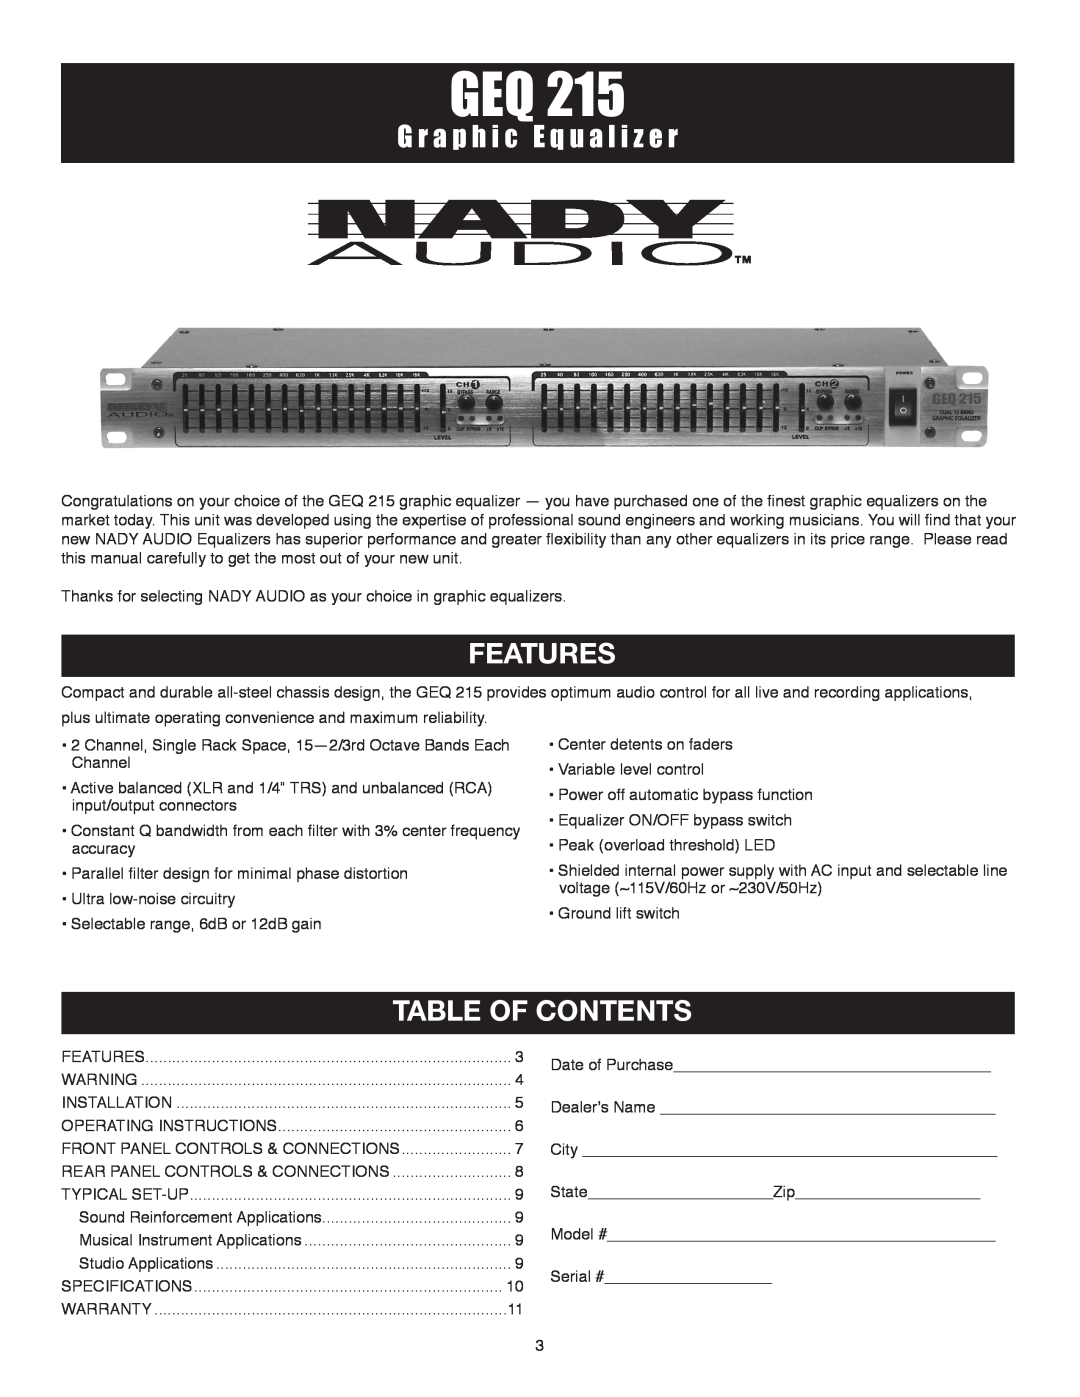 Nady Systems GEQ 215 owner manual Features, Table Of Contents, G r a p h i c E q u a l i z e r 